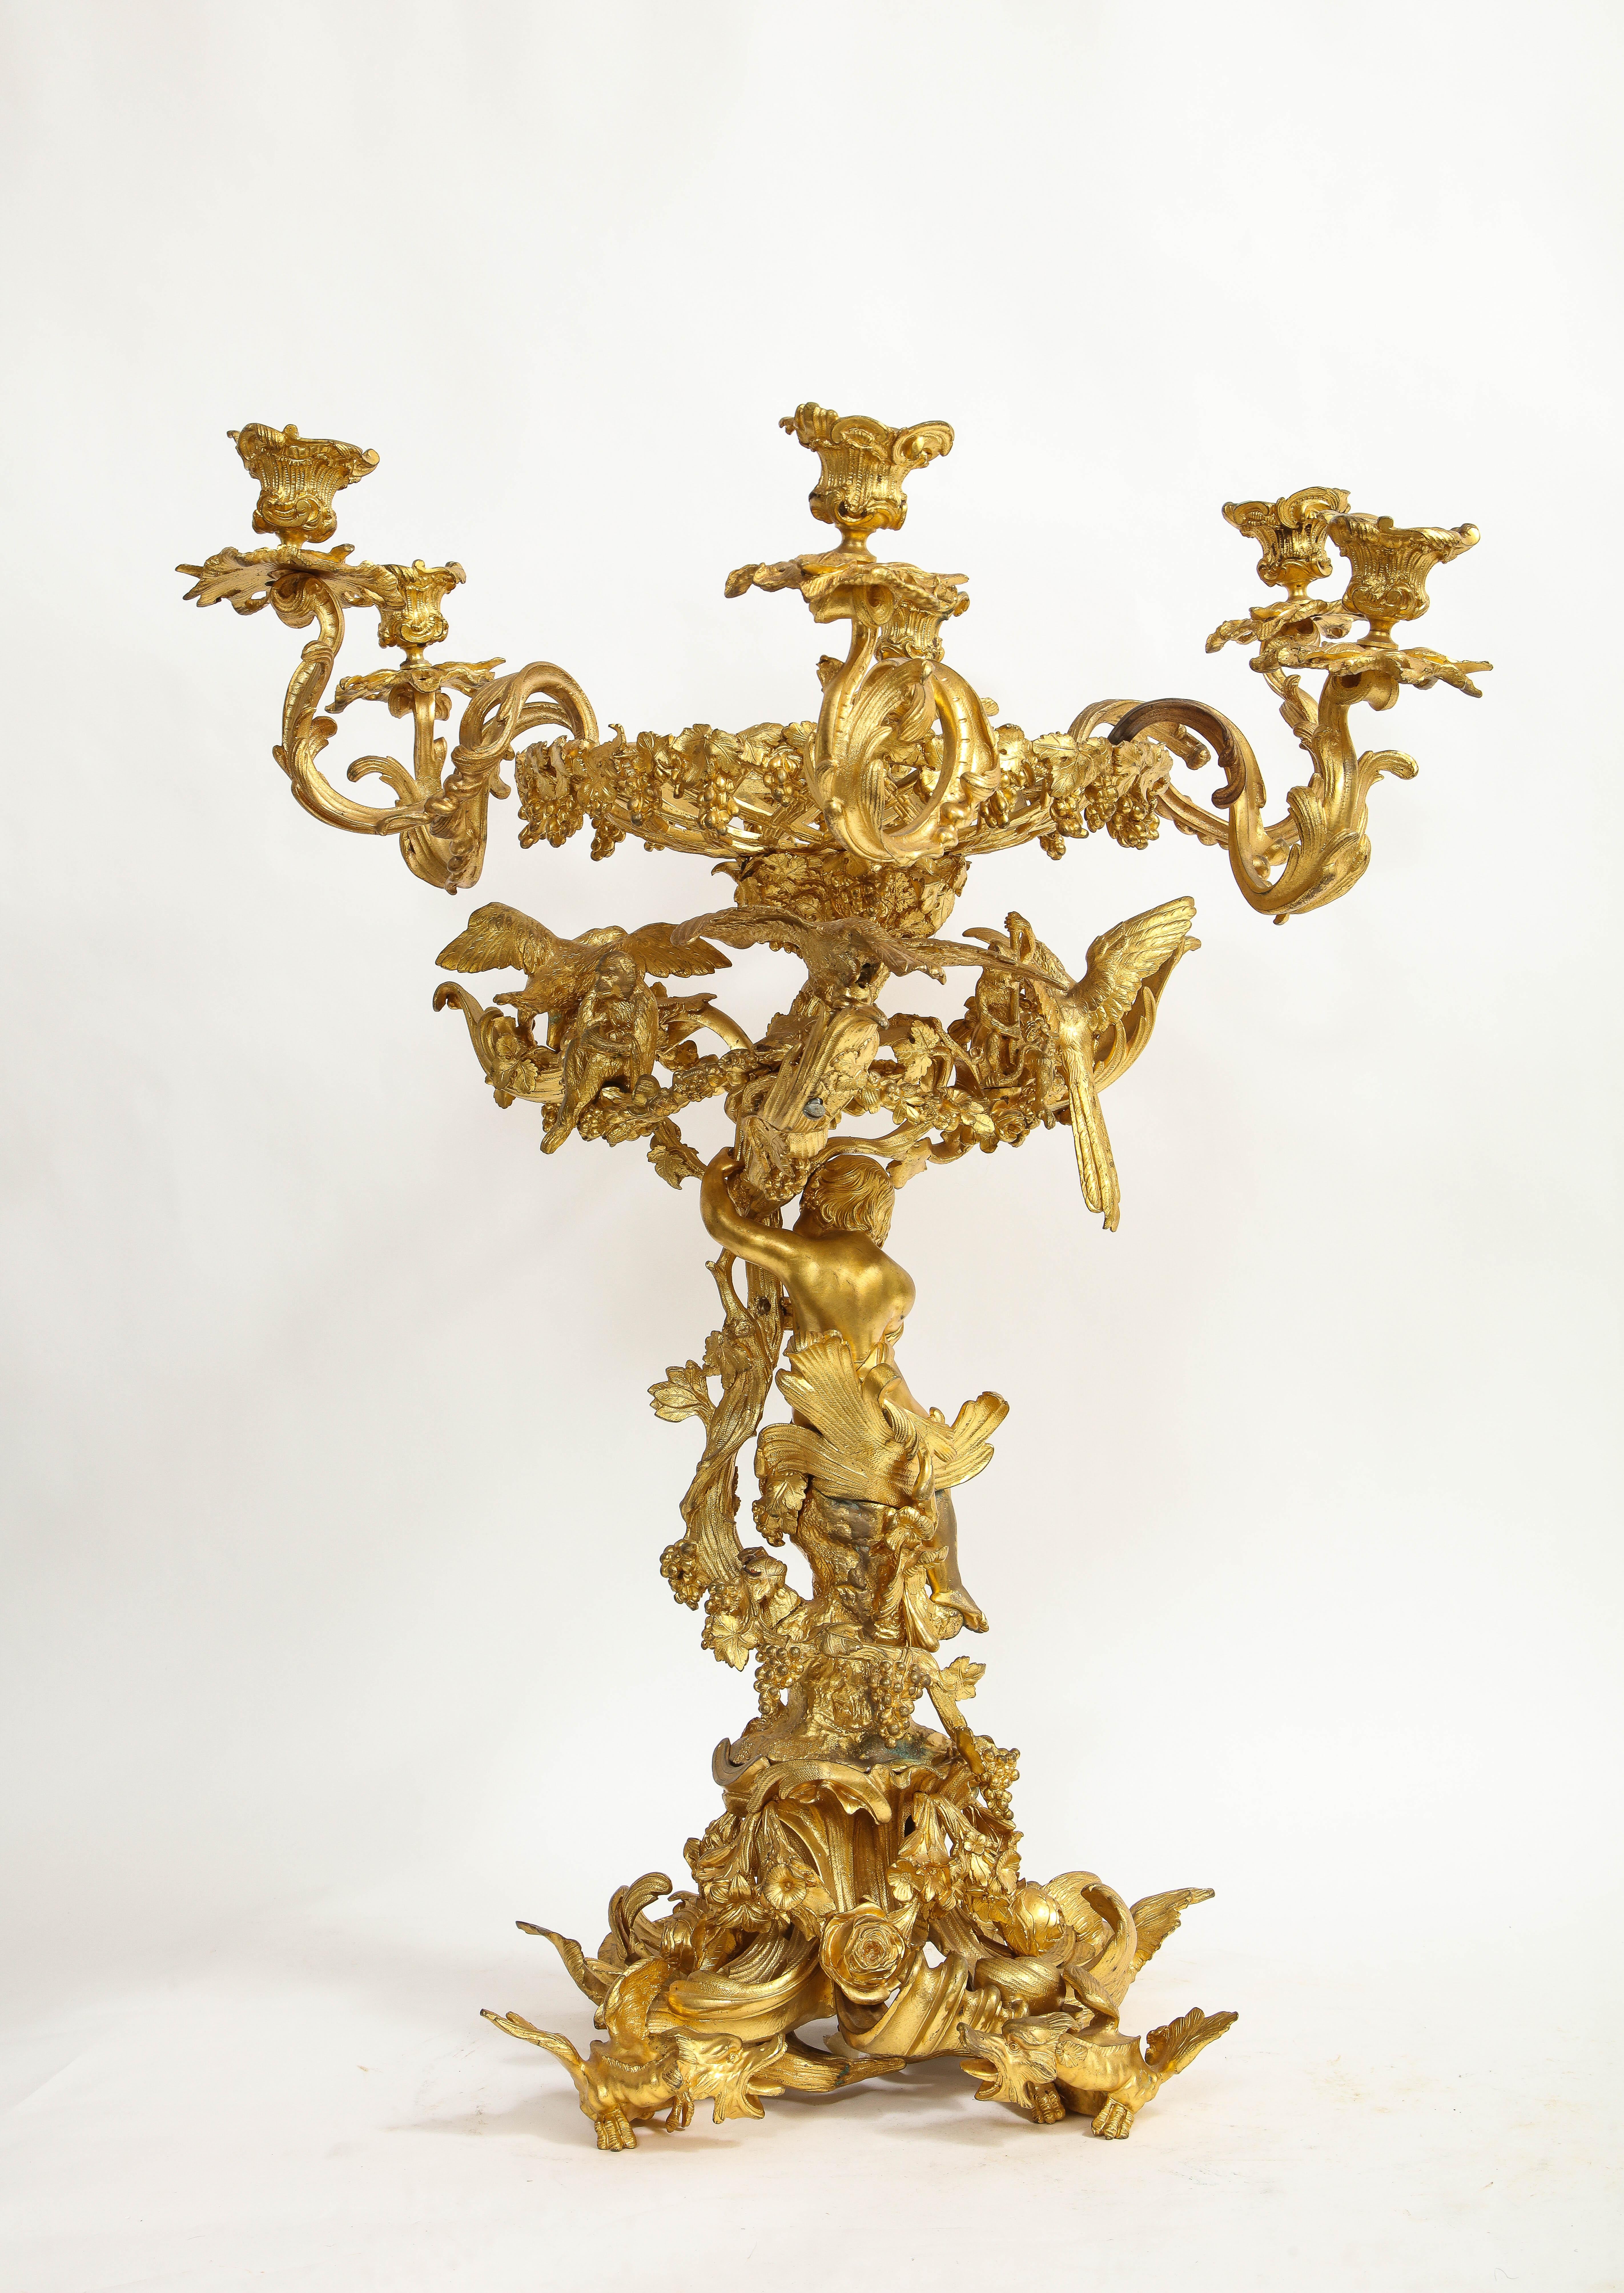 A Fantastic 19th century French Louis XV style Dore bronze figural centerpiece/ six arm candelabra. Truly a marvelous piece that is beautifully cast, hand-chased, and hand-chiseled. The base is beautifully decorated with a fantastic dore bronze